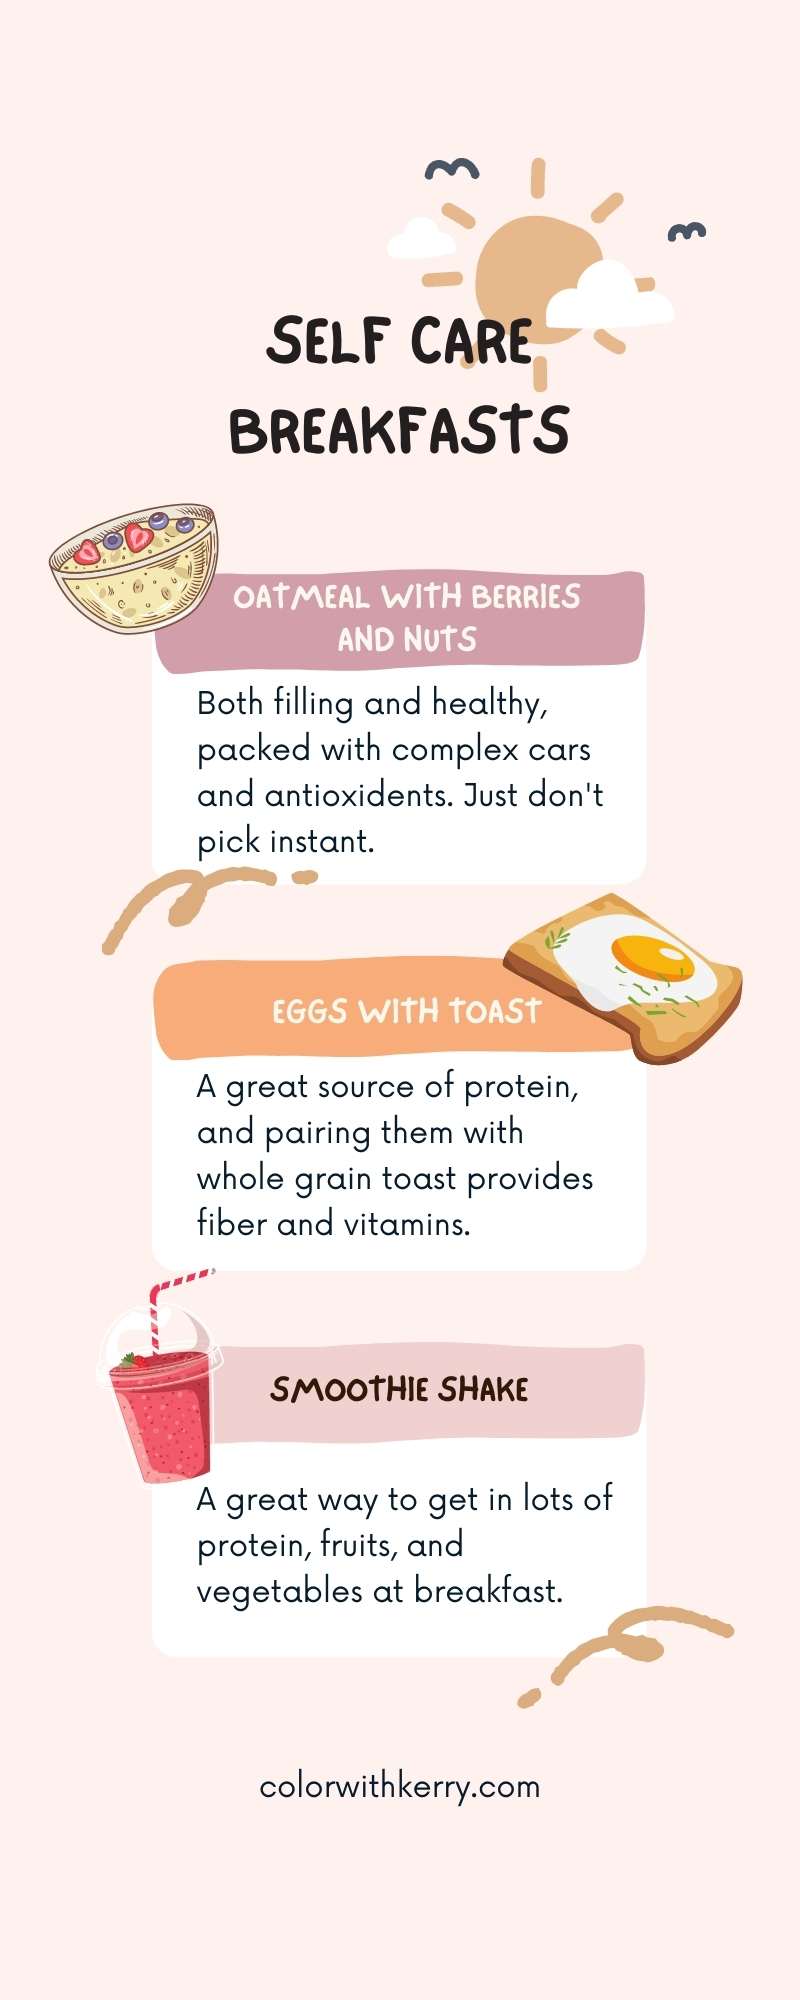 Infographic for self care breakfast ideas